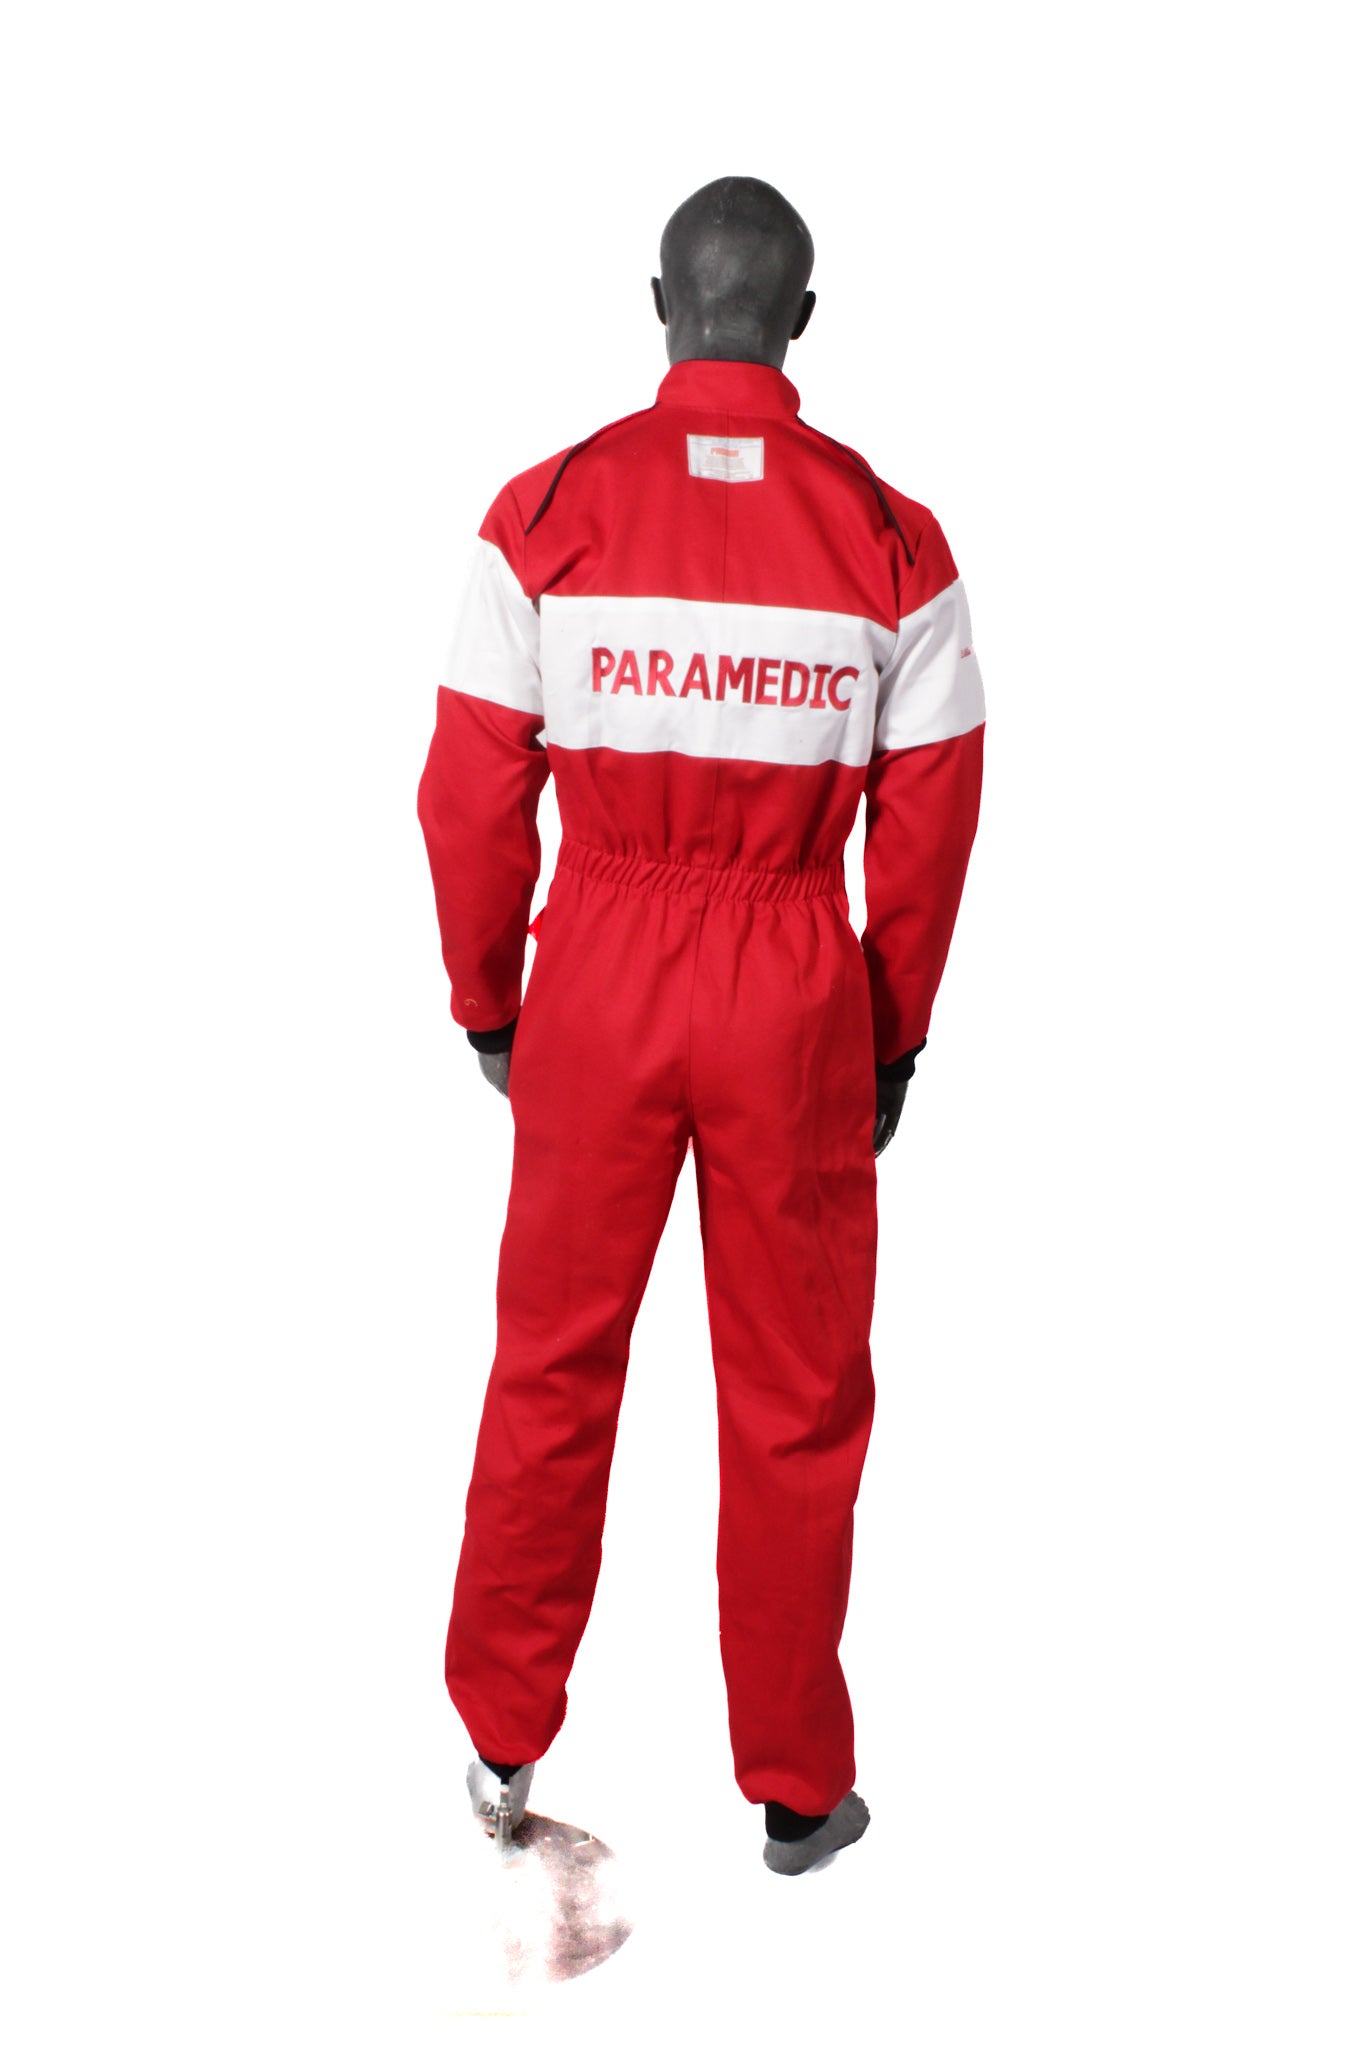 Paramedic/Doctor Suit - Made-to-Measure